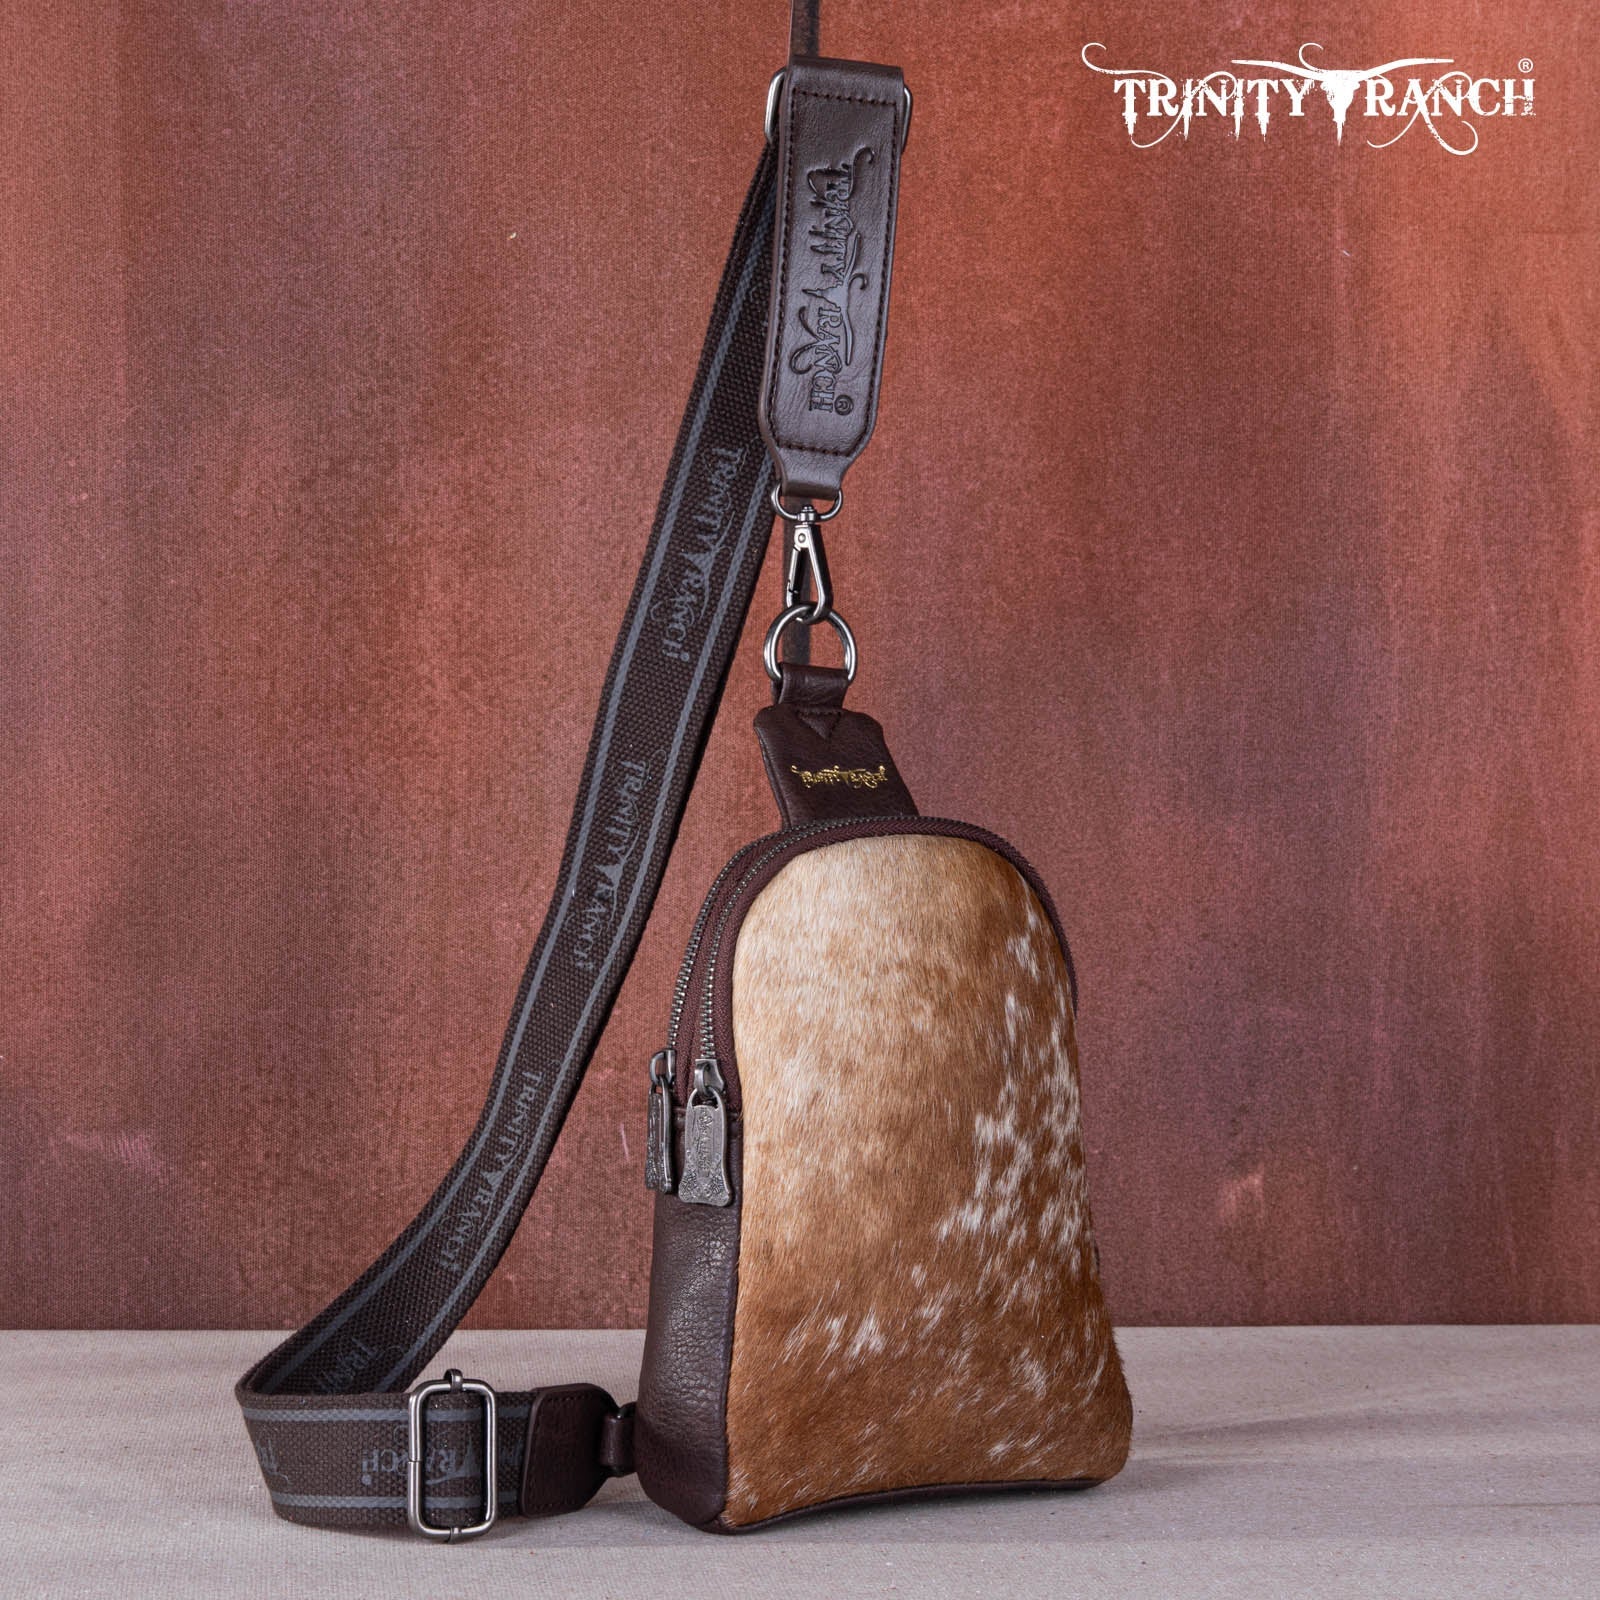 TR159-210 Trinity Ranch Genuine Hair-On Cowhide  Collection Sling Bag - Montana West World